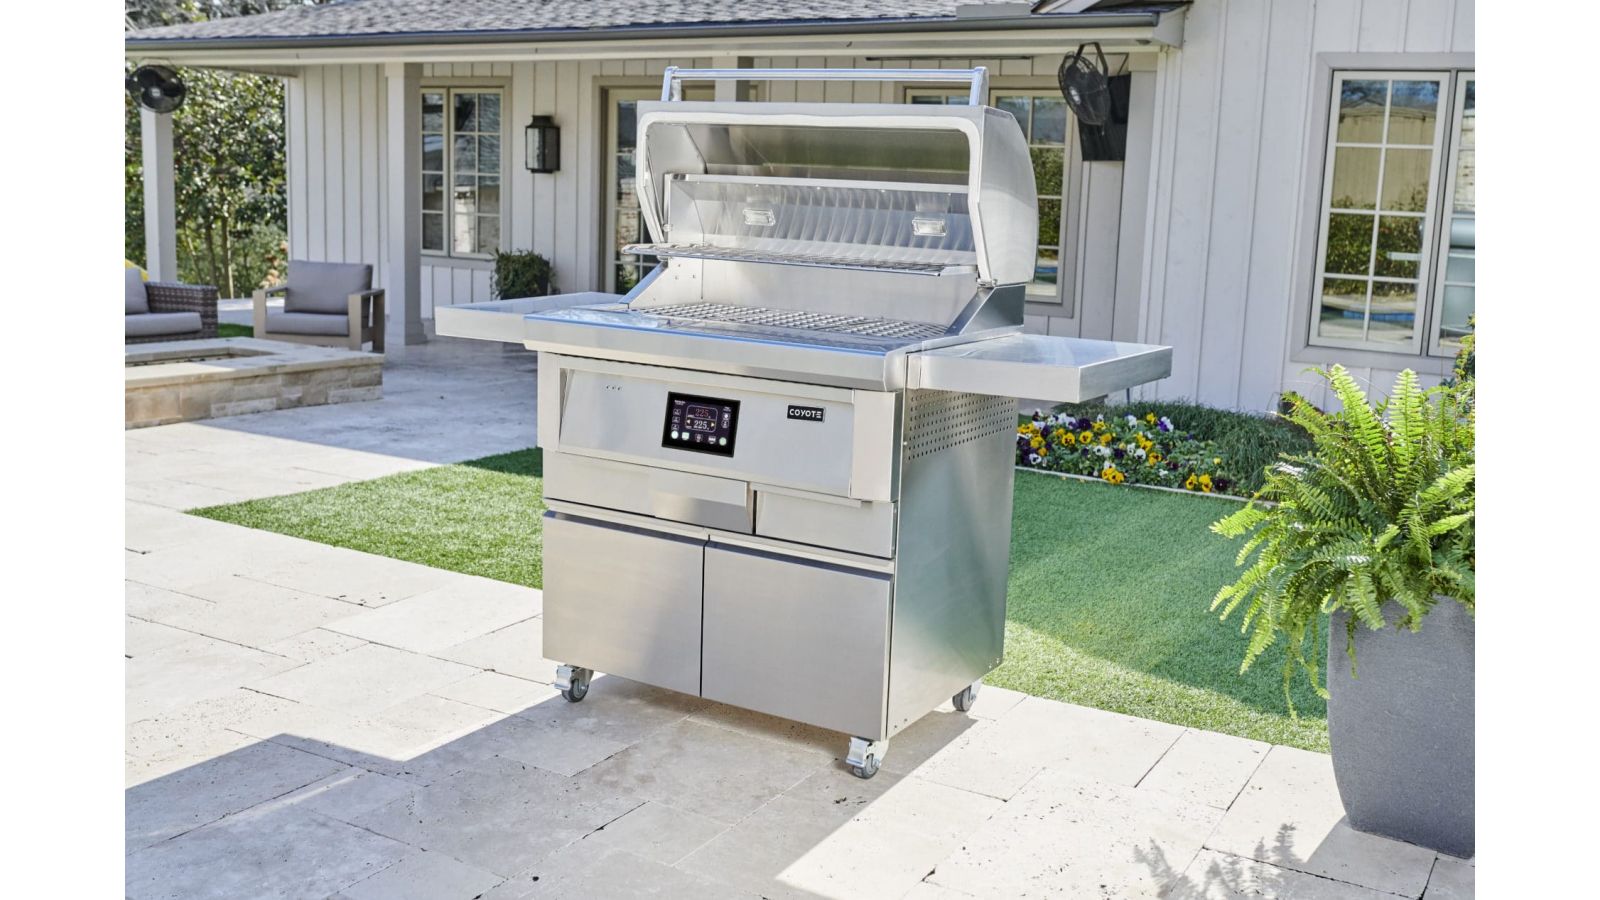 The Coyote Pellet Grill